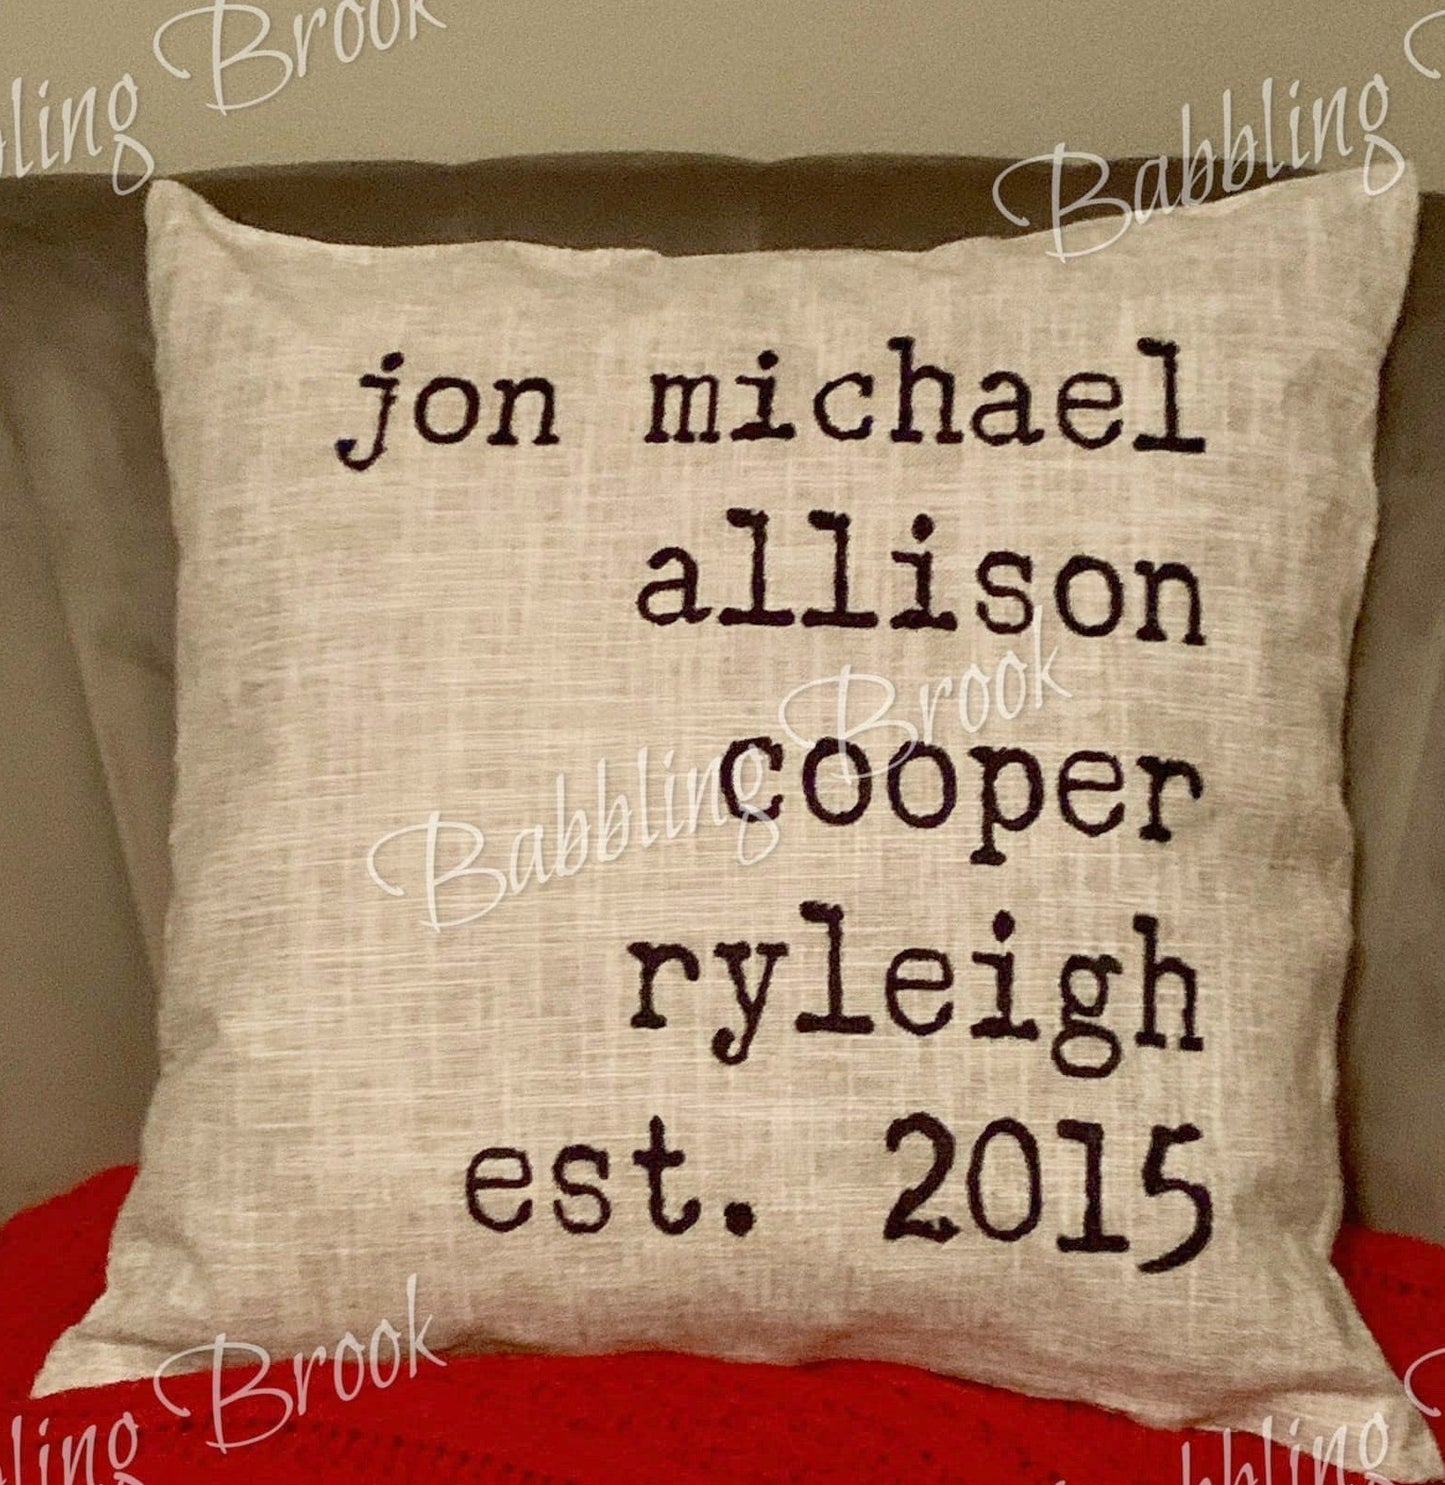 Personalized Pillow Cover - Babbling Brook